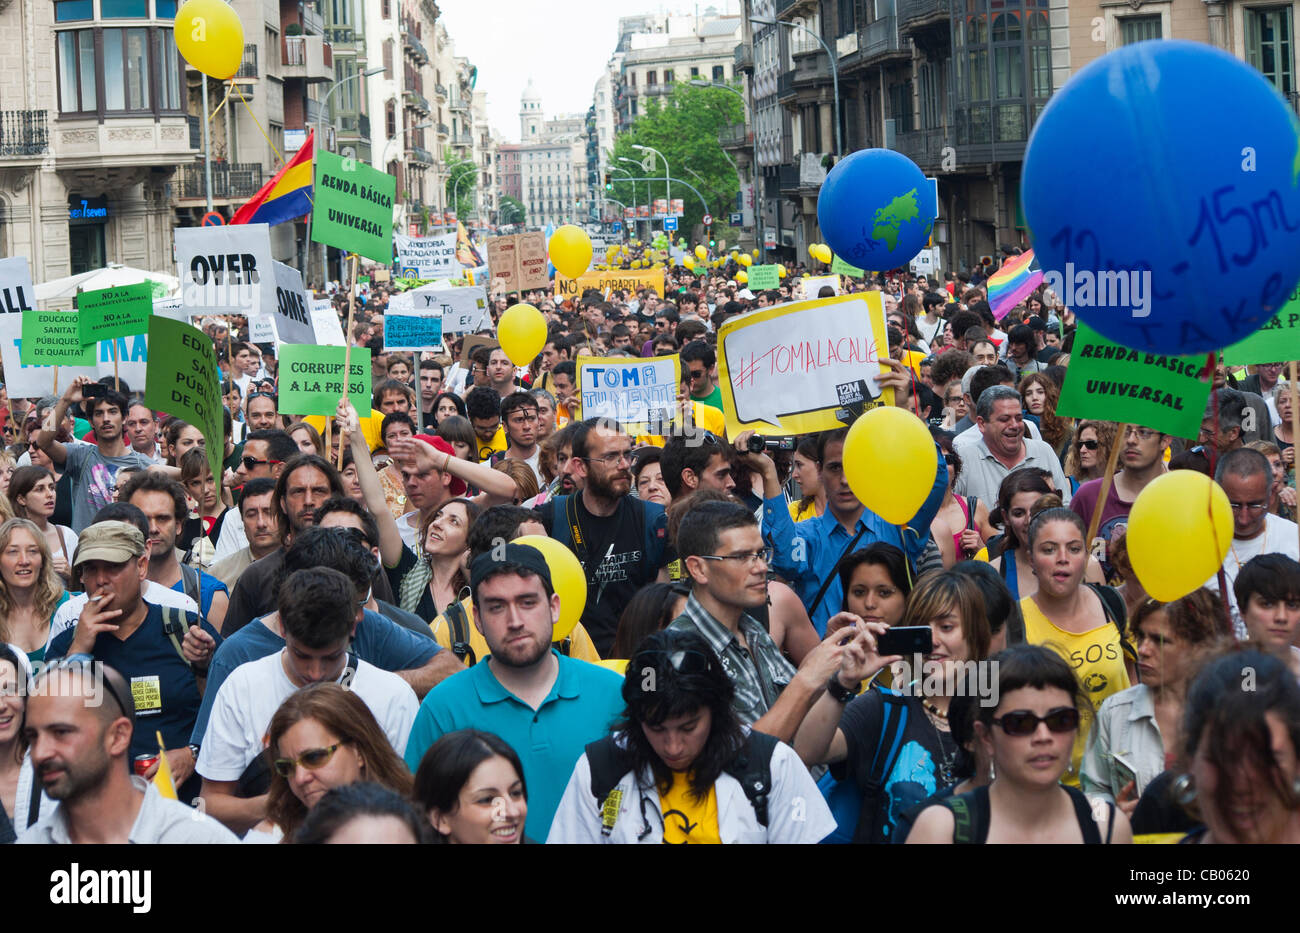 Barcelona, May 12, 2012. Thousands of people from the movement ' indignados' manifest themselves through the streets of downtown Barcelona to denounce the unjust economic policy of government in a show of force a year after his birth. The protests will continue until May 15, the anniversary of the Stock Photo